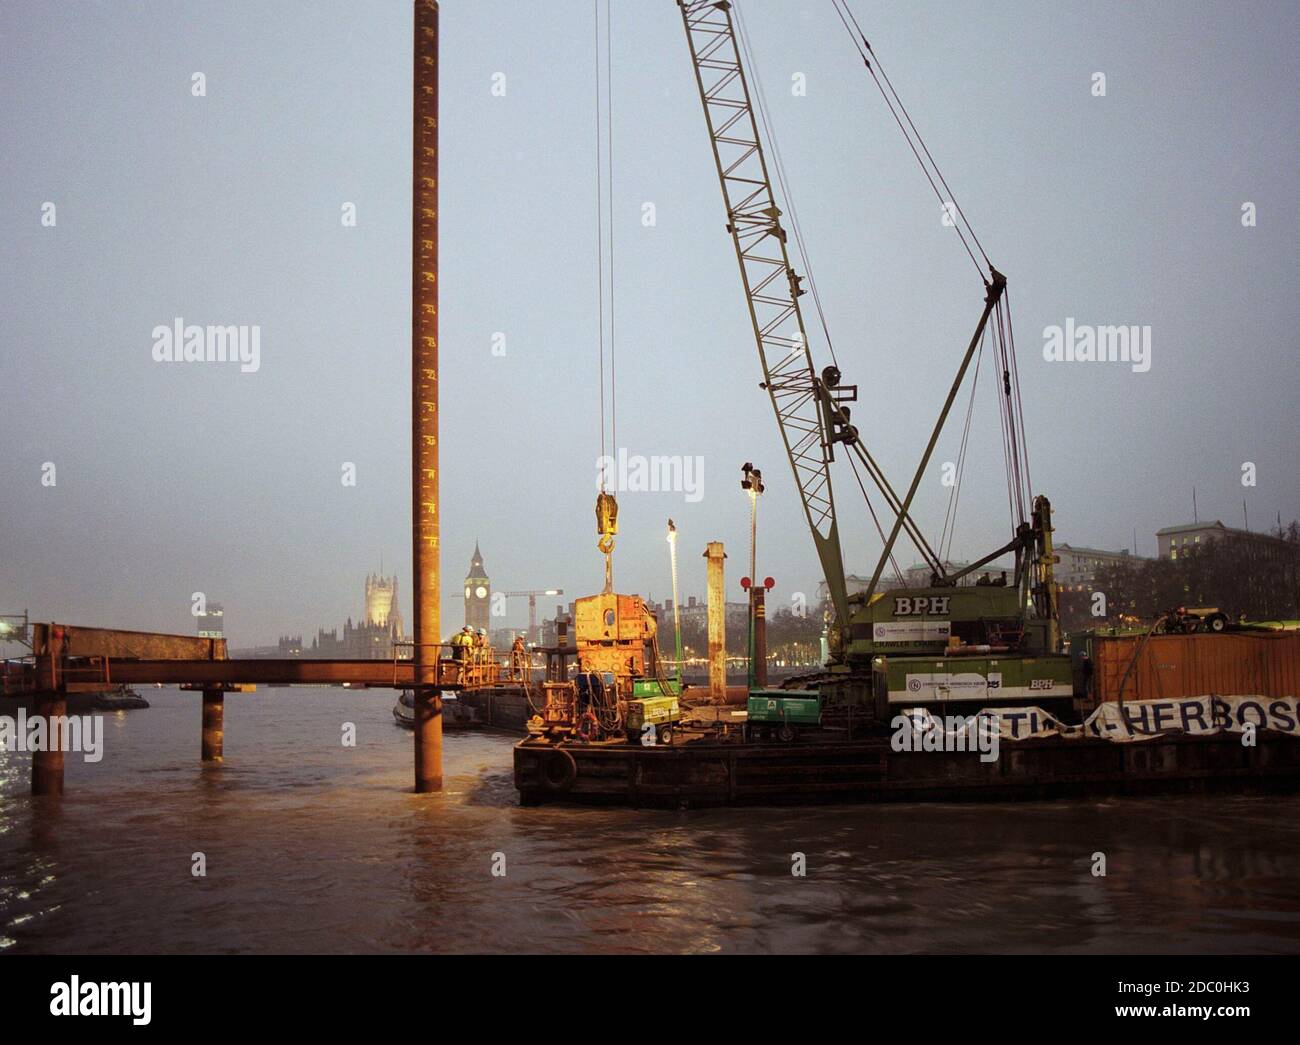 1996, construction works on the river Thames at Hungerford Bridge, London, South East England, UK Stock Photo